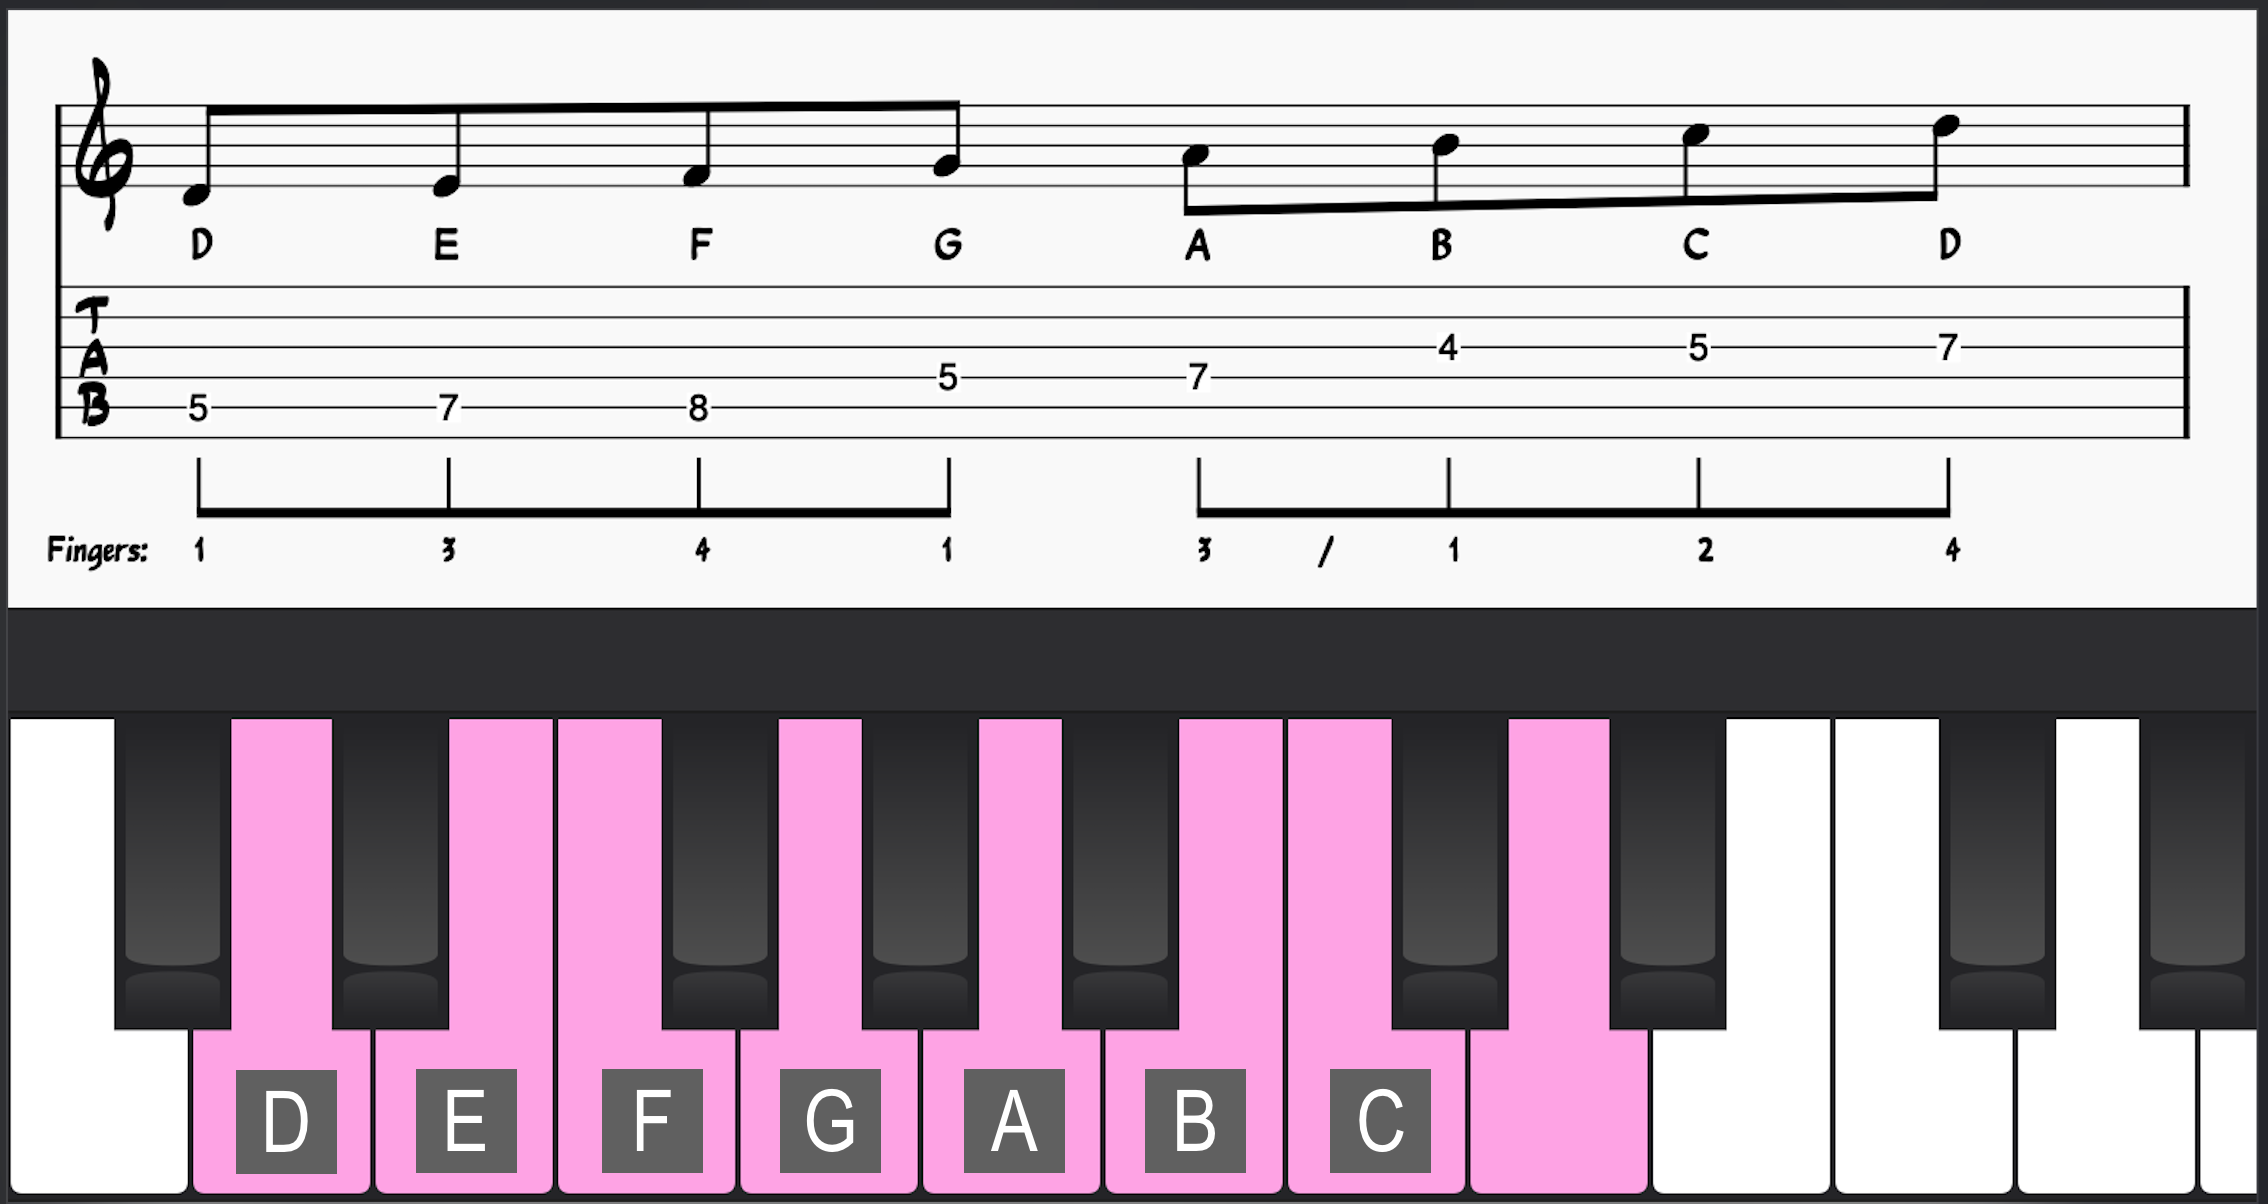 D Dorian Scale in Key of C on guitar and piano